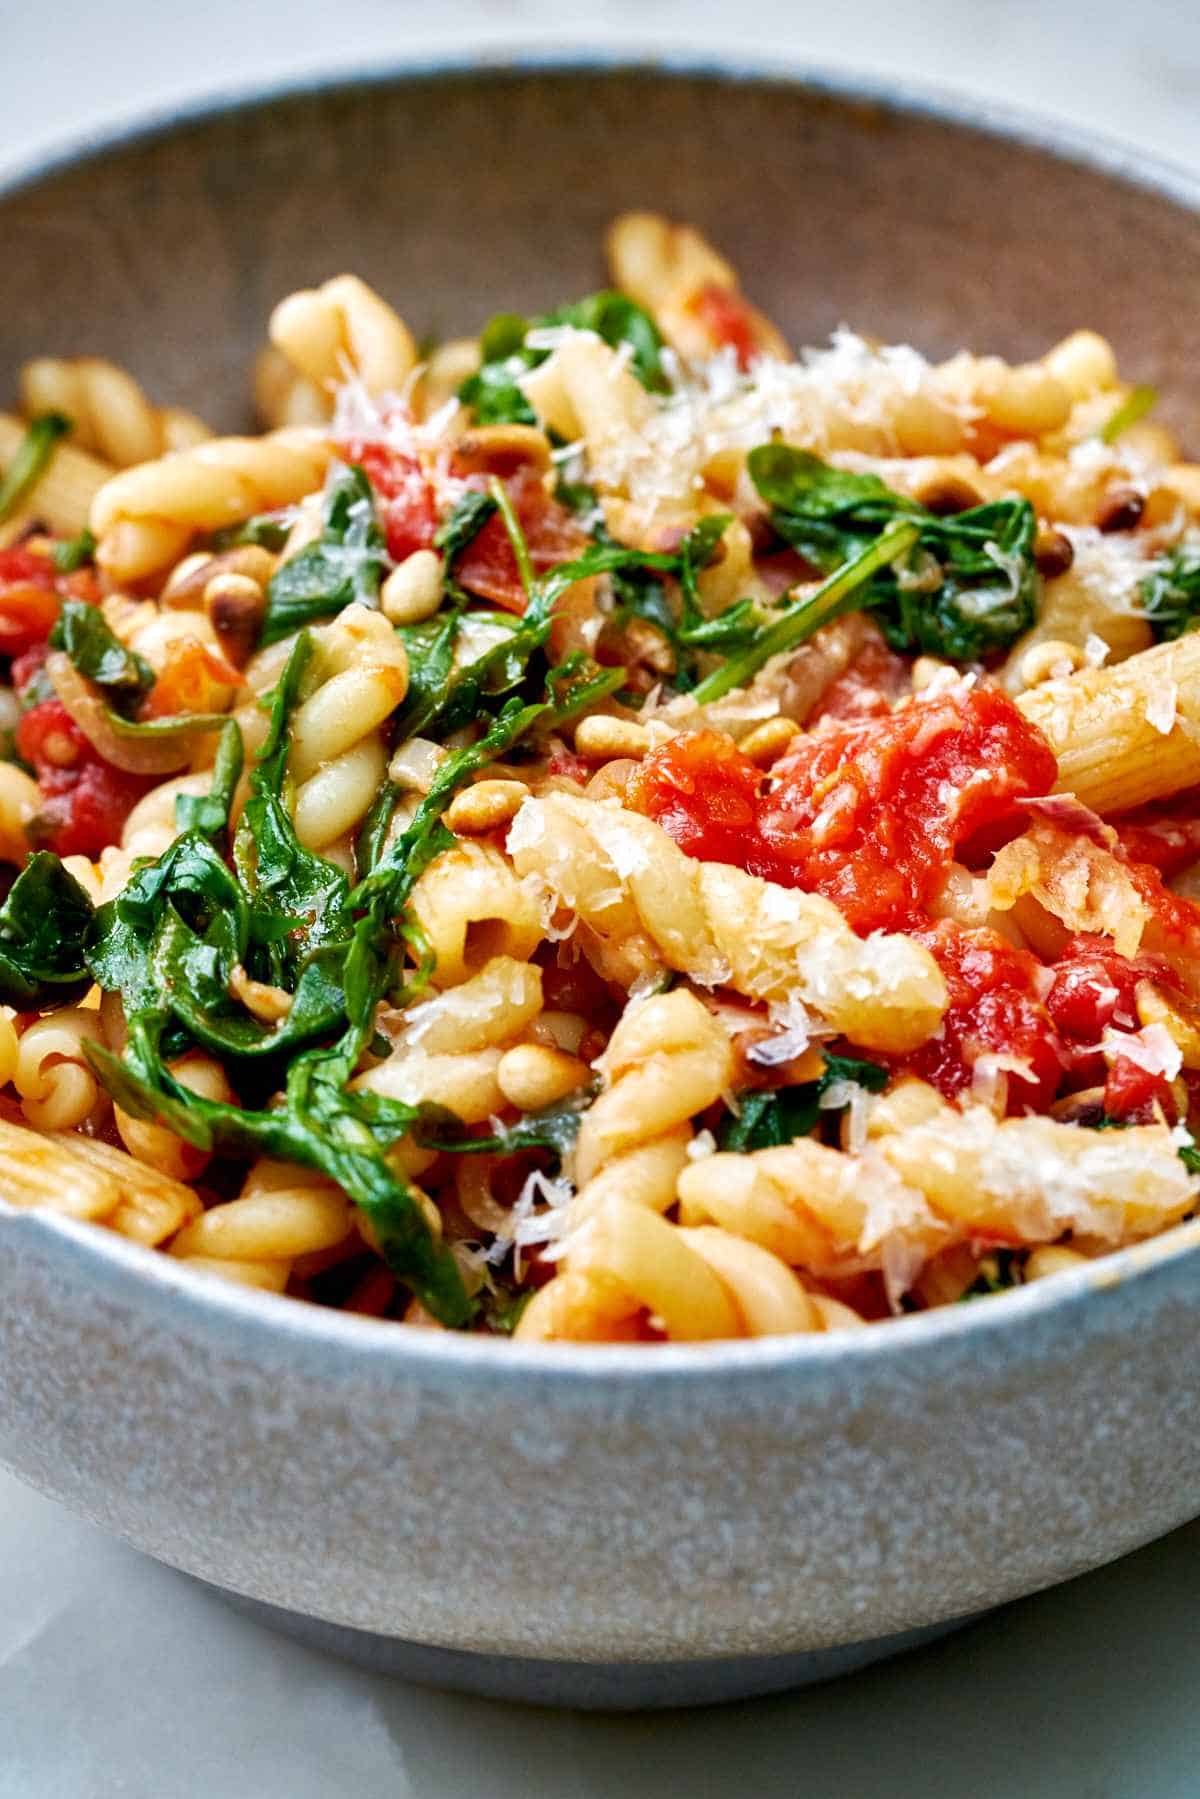 Bowl with pasta and greens.